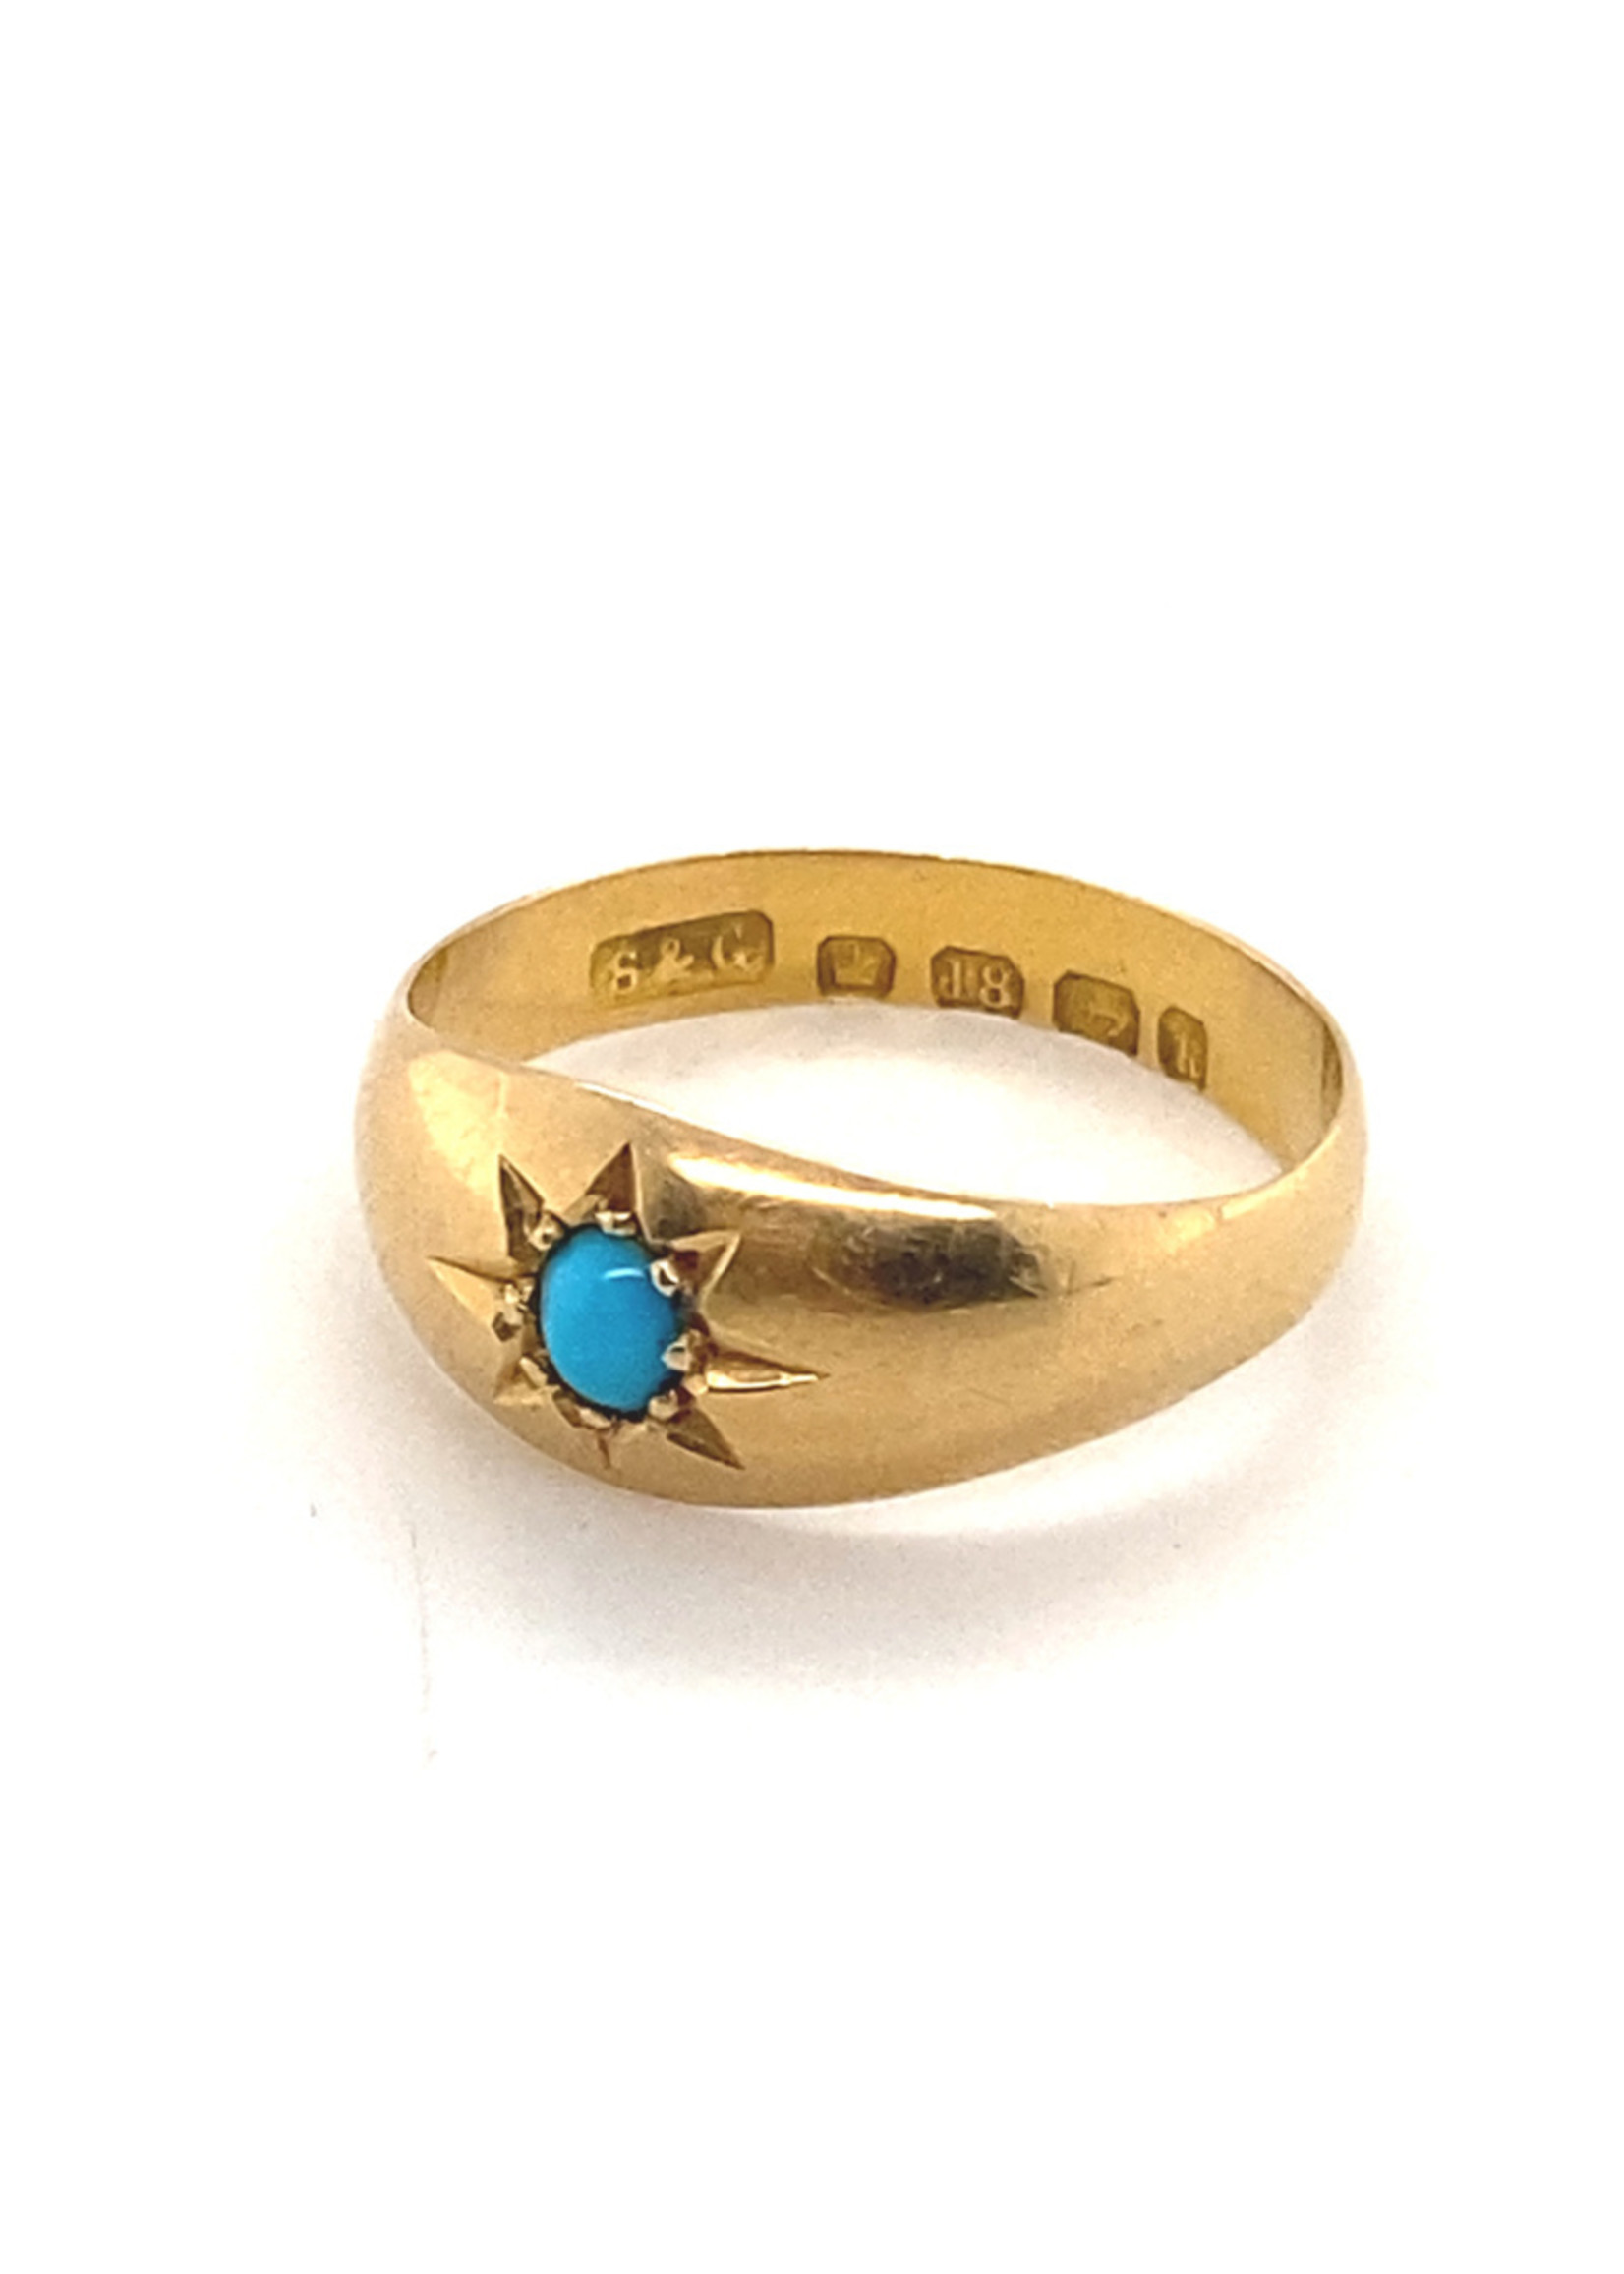 Vintage & Occasion Occasion gouden toelopende ring met turkoois